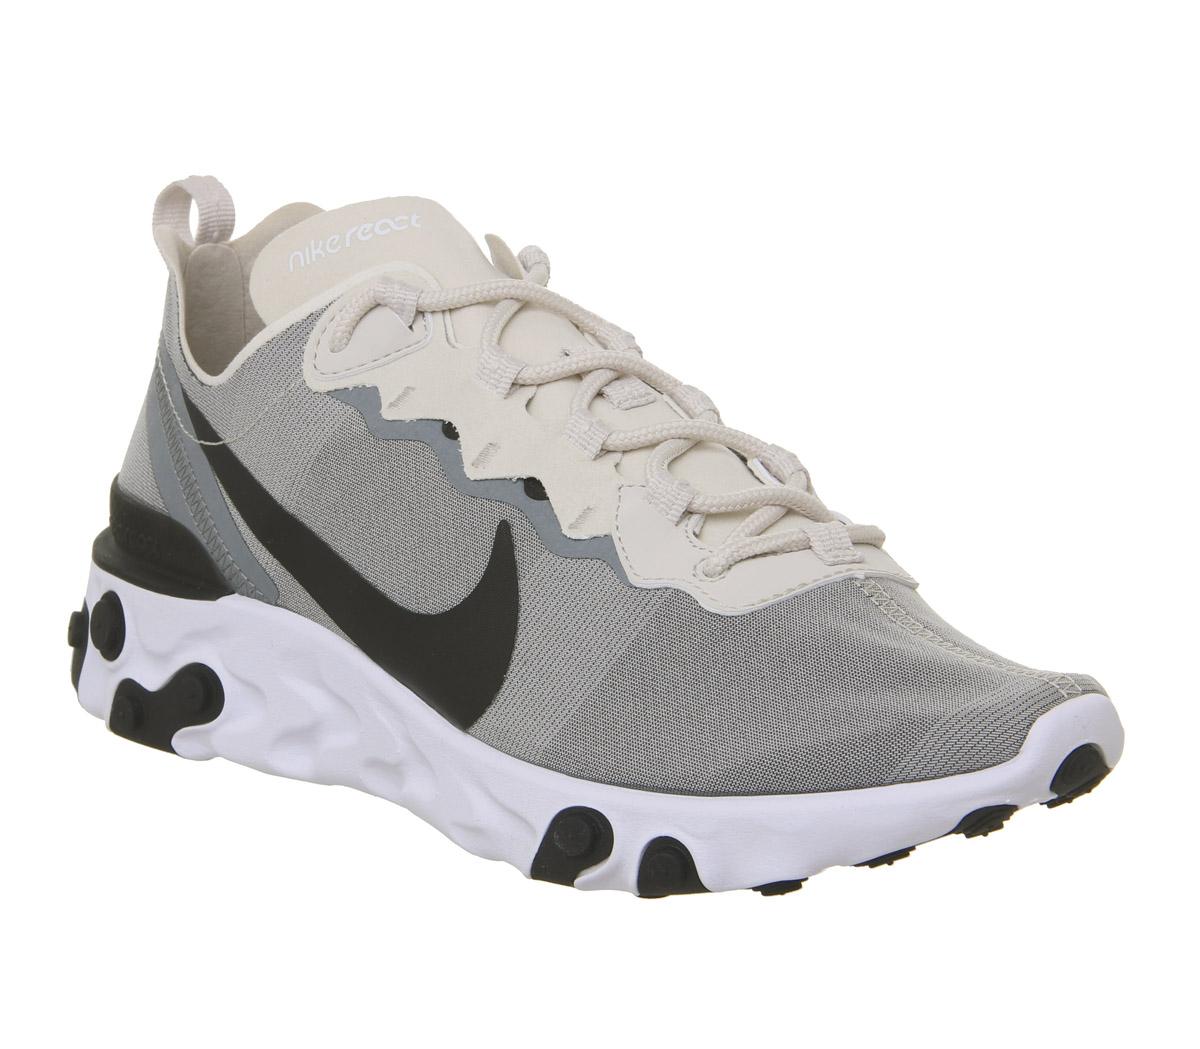 Nike React Element Trainers Light Brown - Men's Trainers